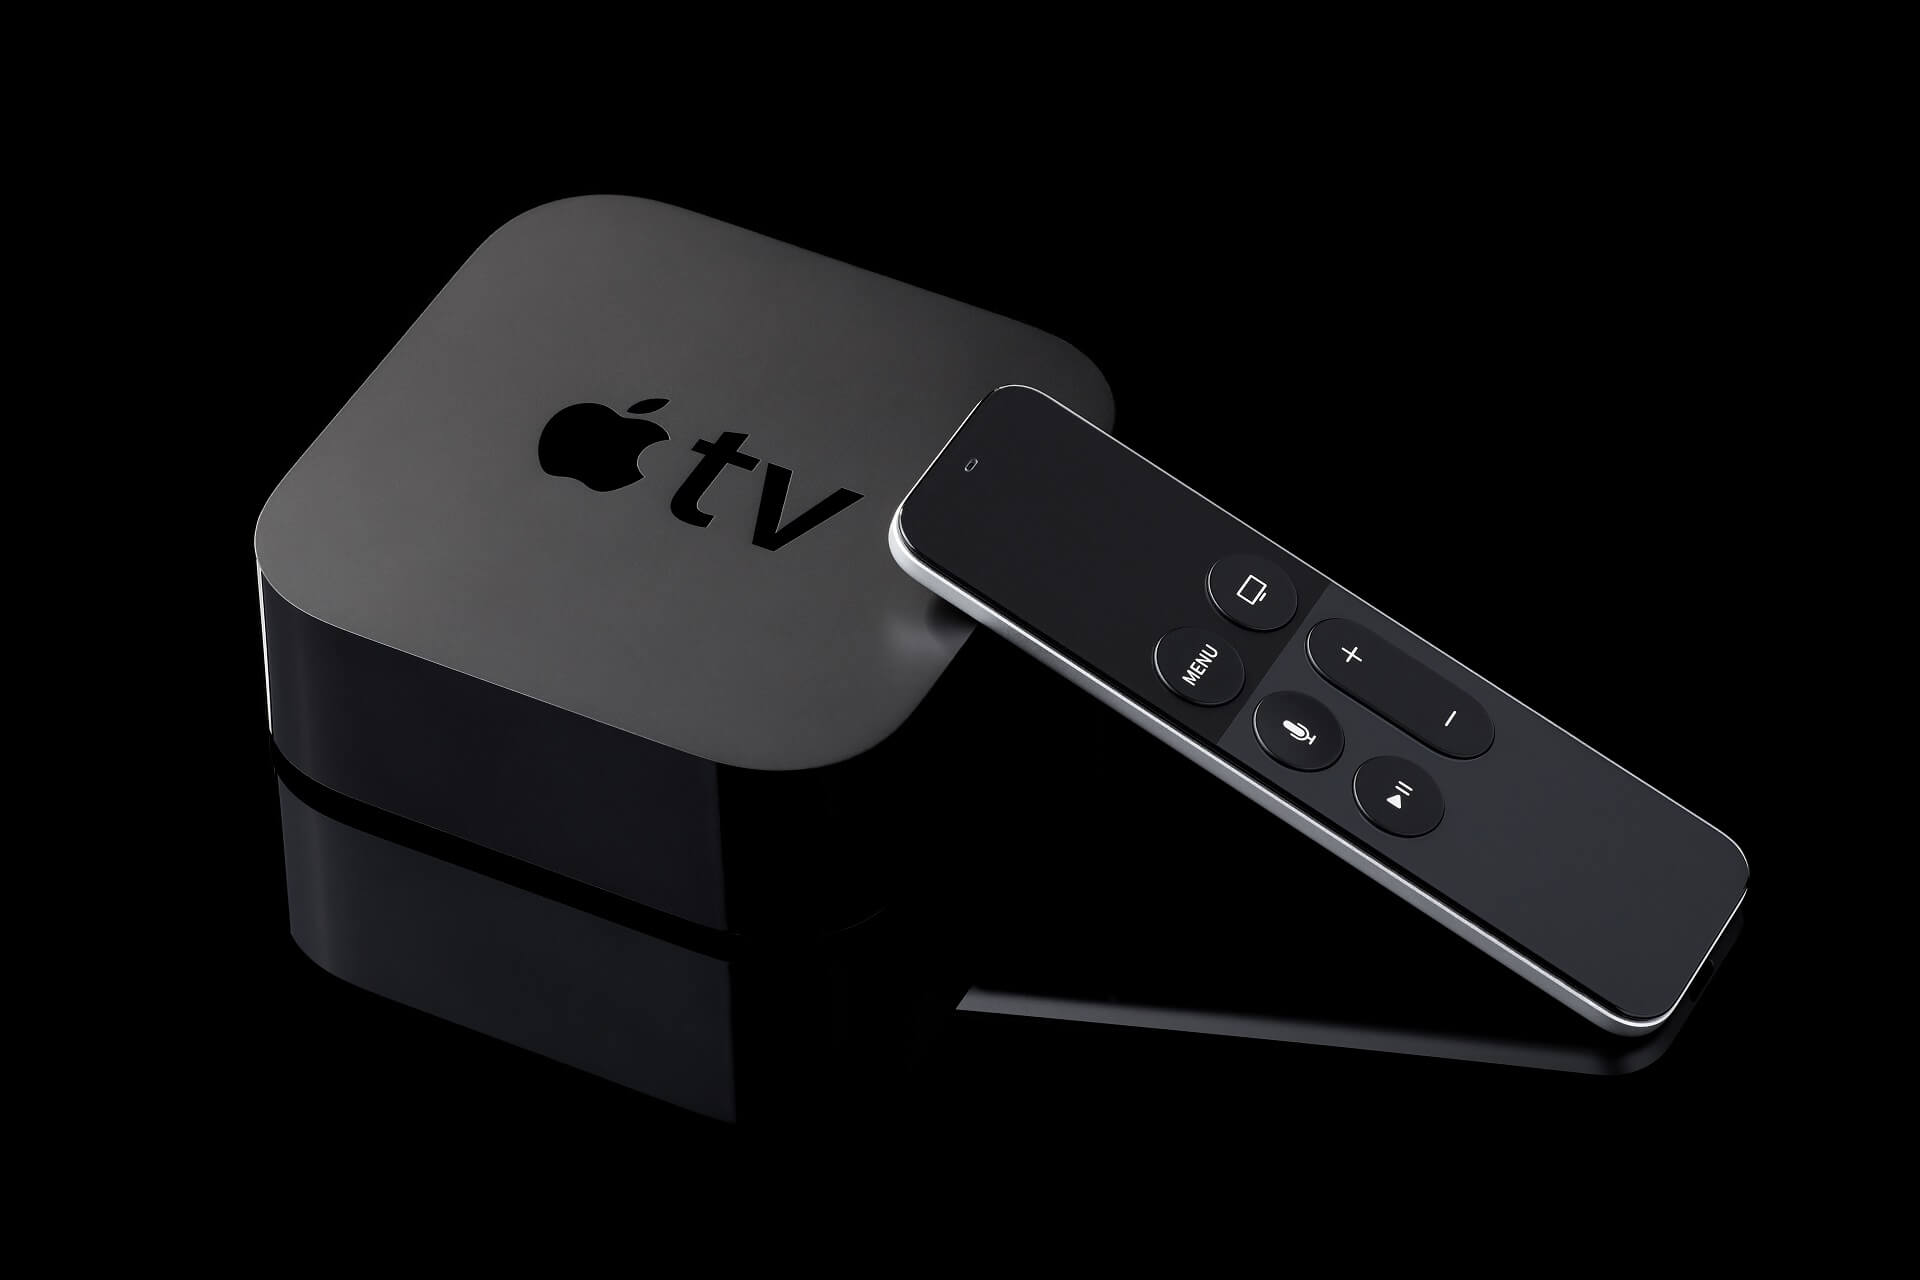 Apple TV doesn't respond to remote